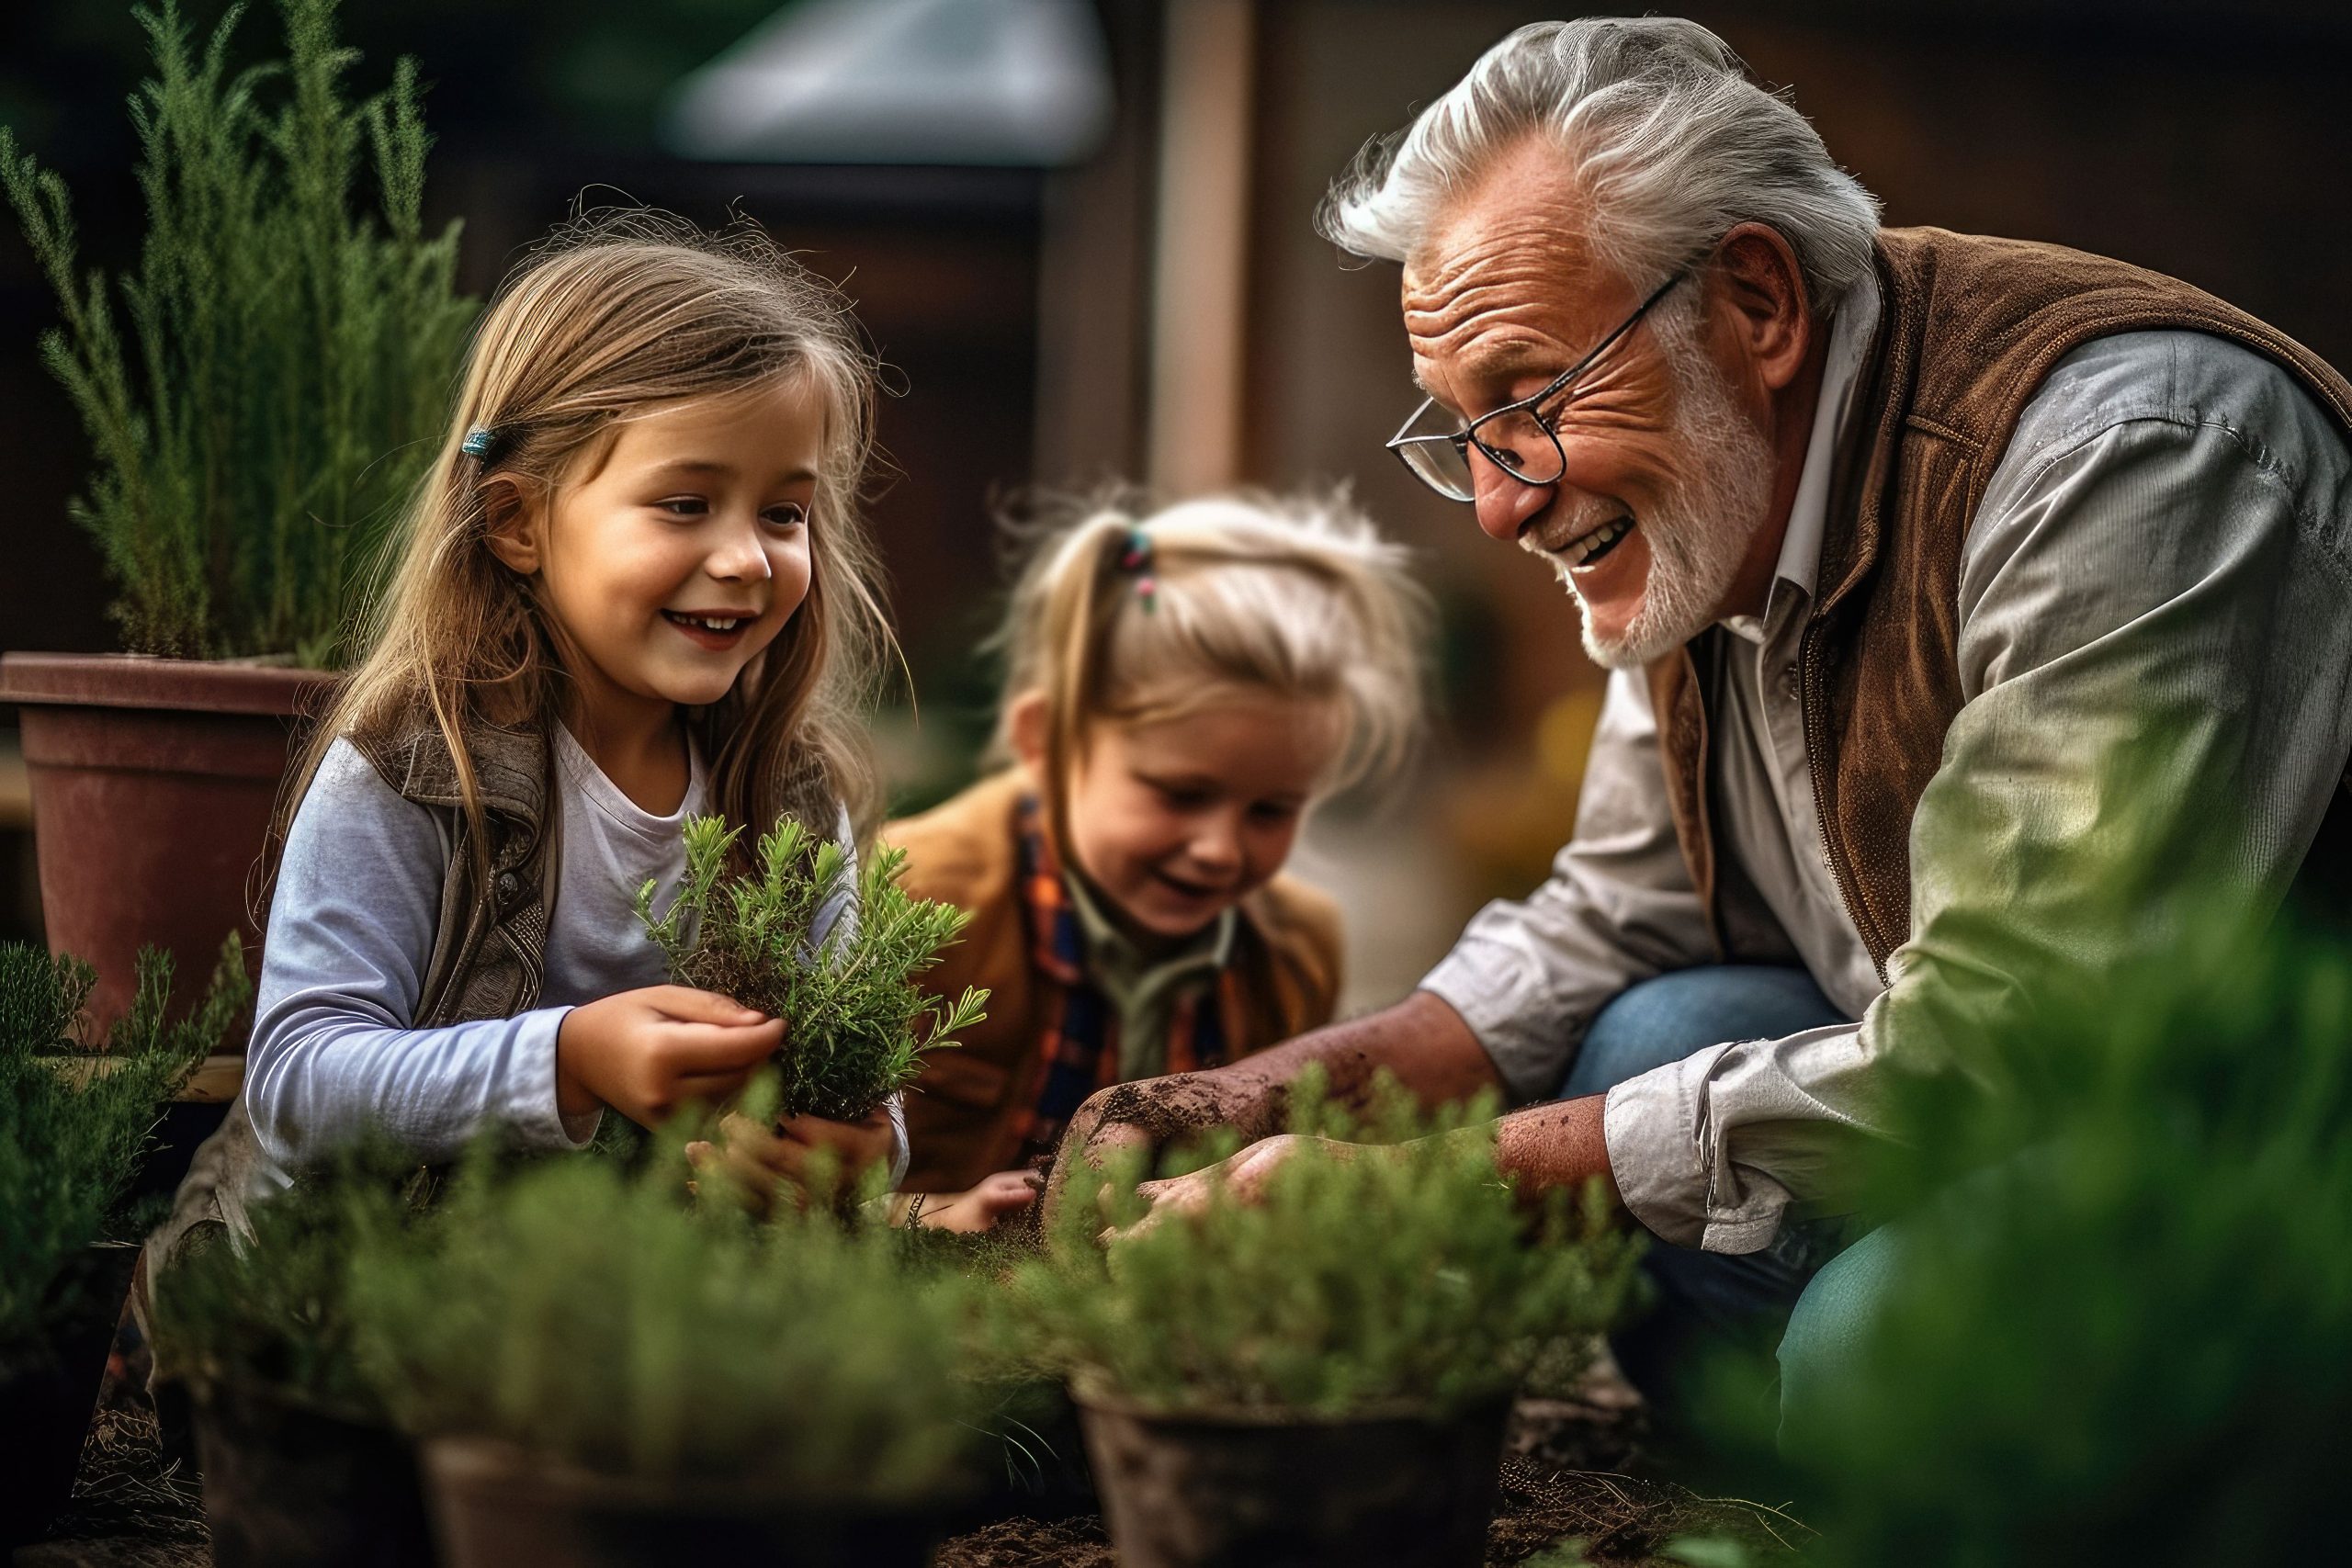 Grandpa smiling while gardening with two young girls